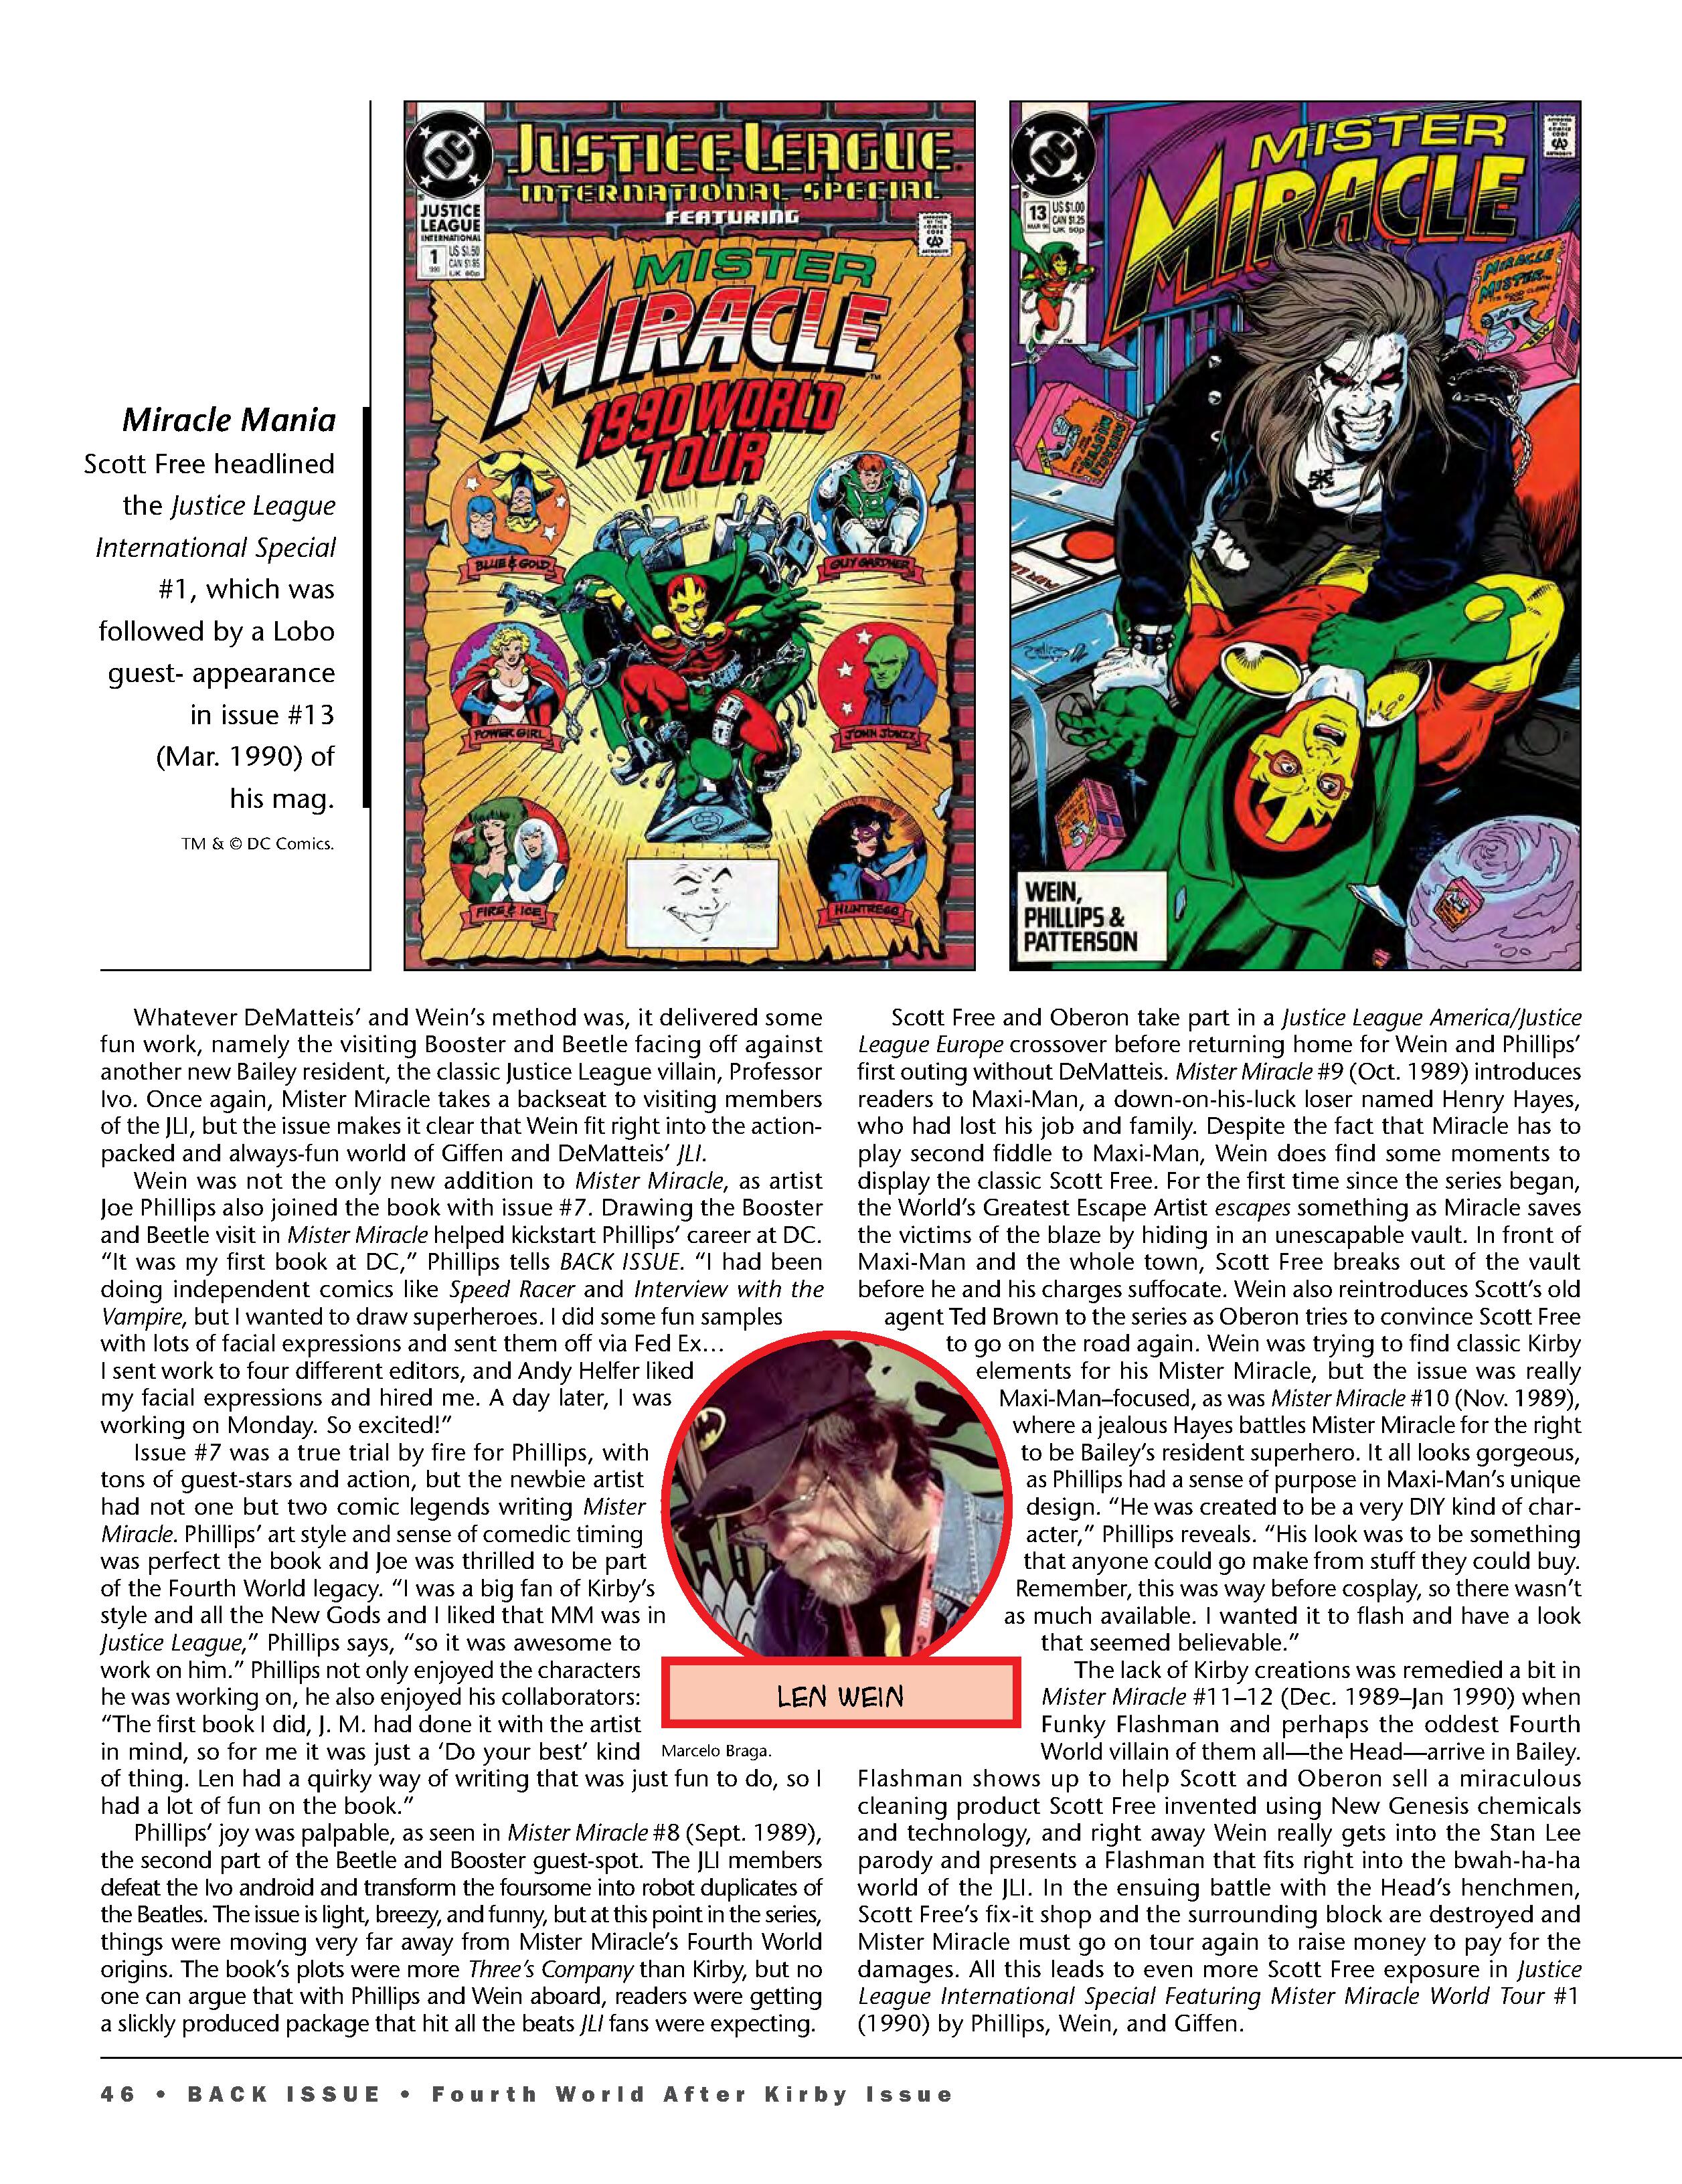 Read online Back Issue comic -  Issue #104 - 48